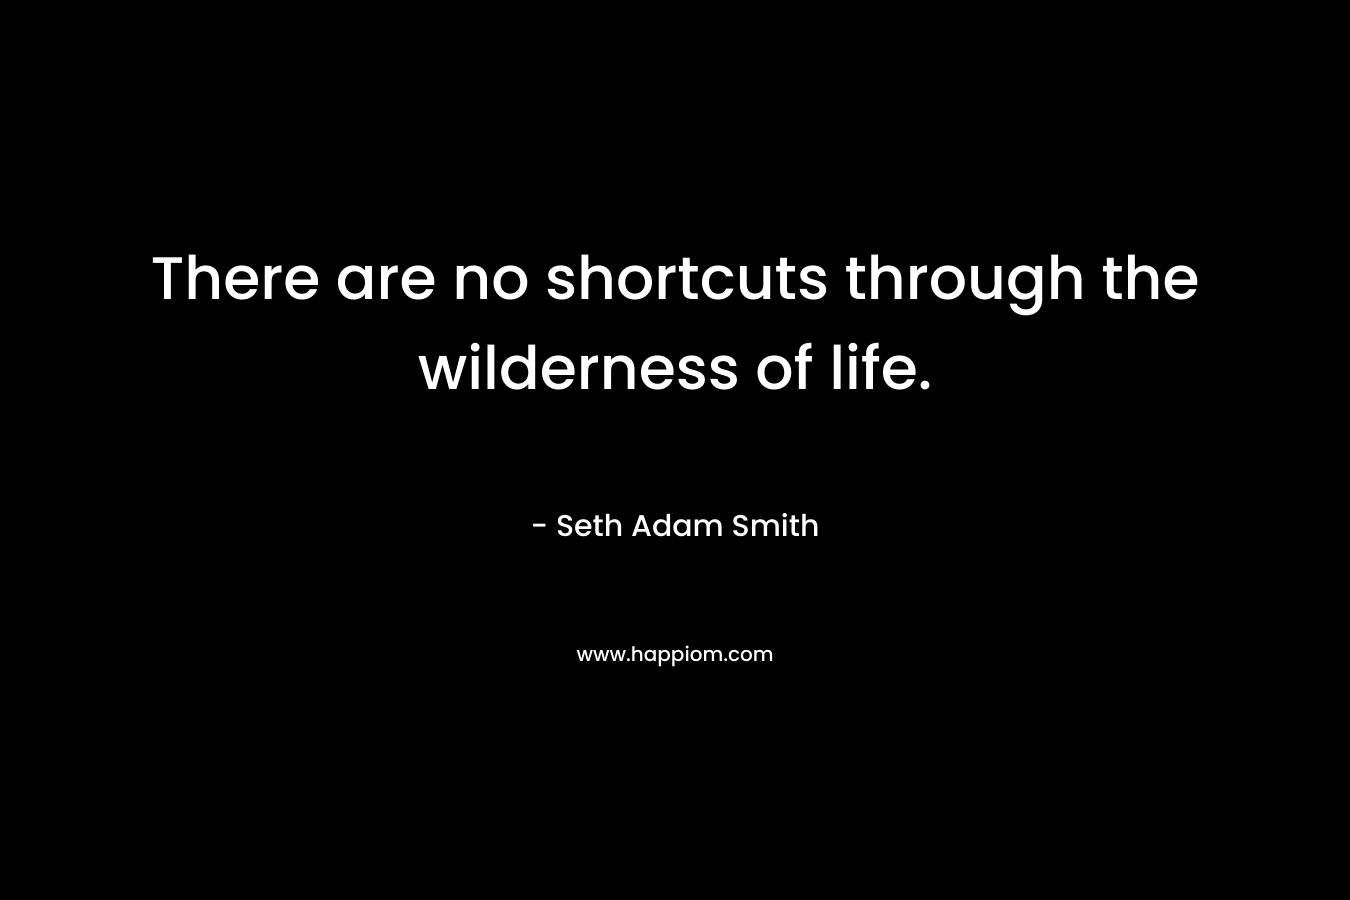 There are no shortcuts through the wilderness of life.